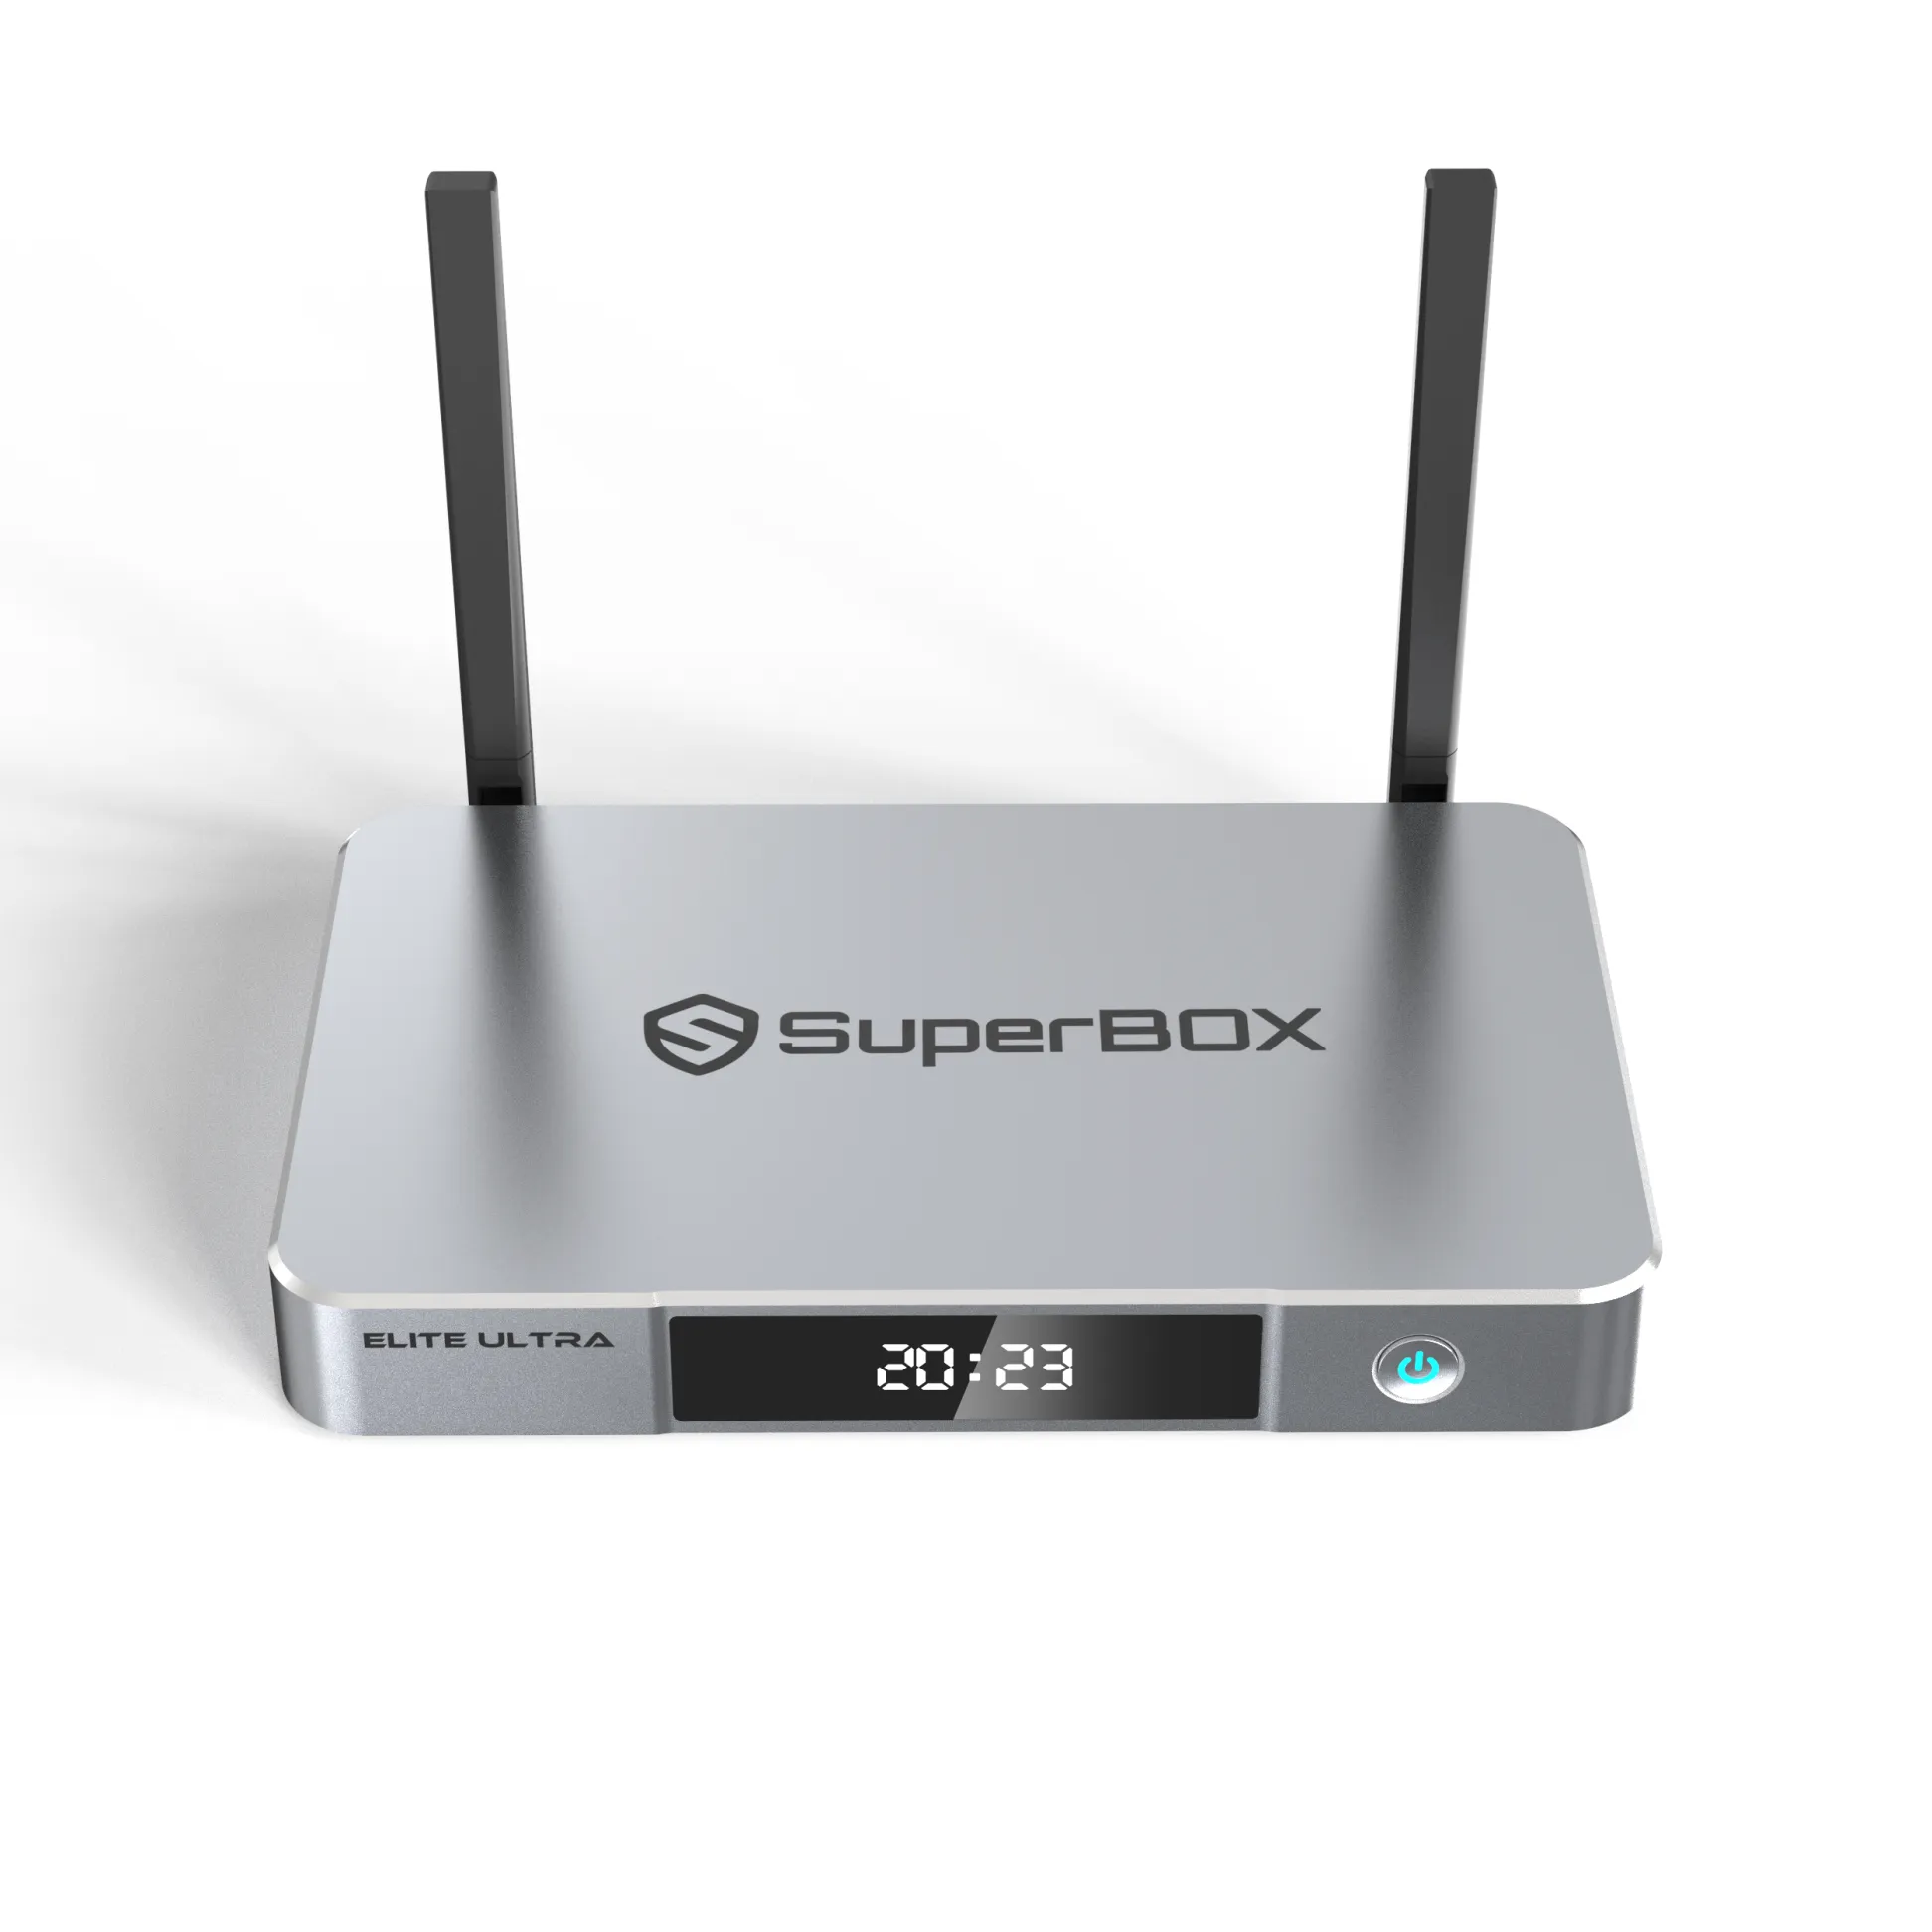 SuperBox Elite Ultra (New) Fully Load 6k 4GB Ram + 128GB, Voice Control Remote, ANDROID TV Dual Band Wi-Fi, 7 Days Playback Ultra HD 6K Video Player